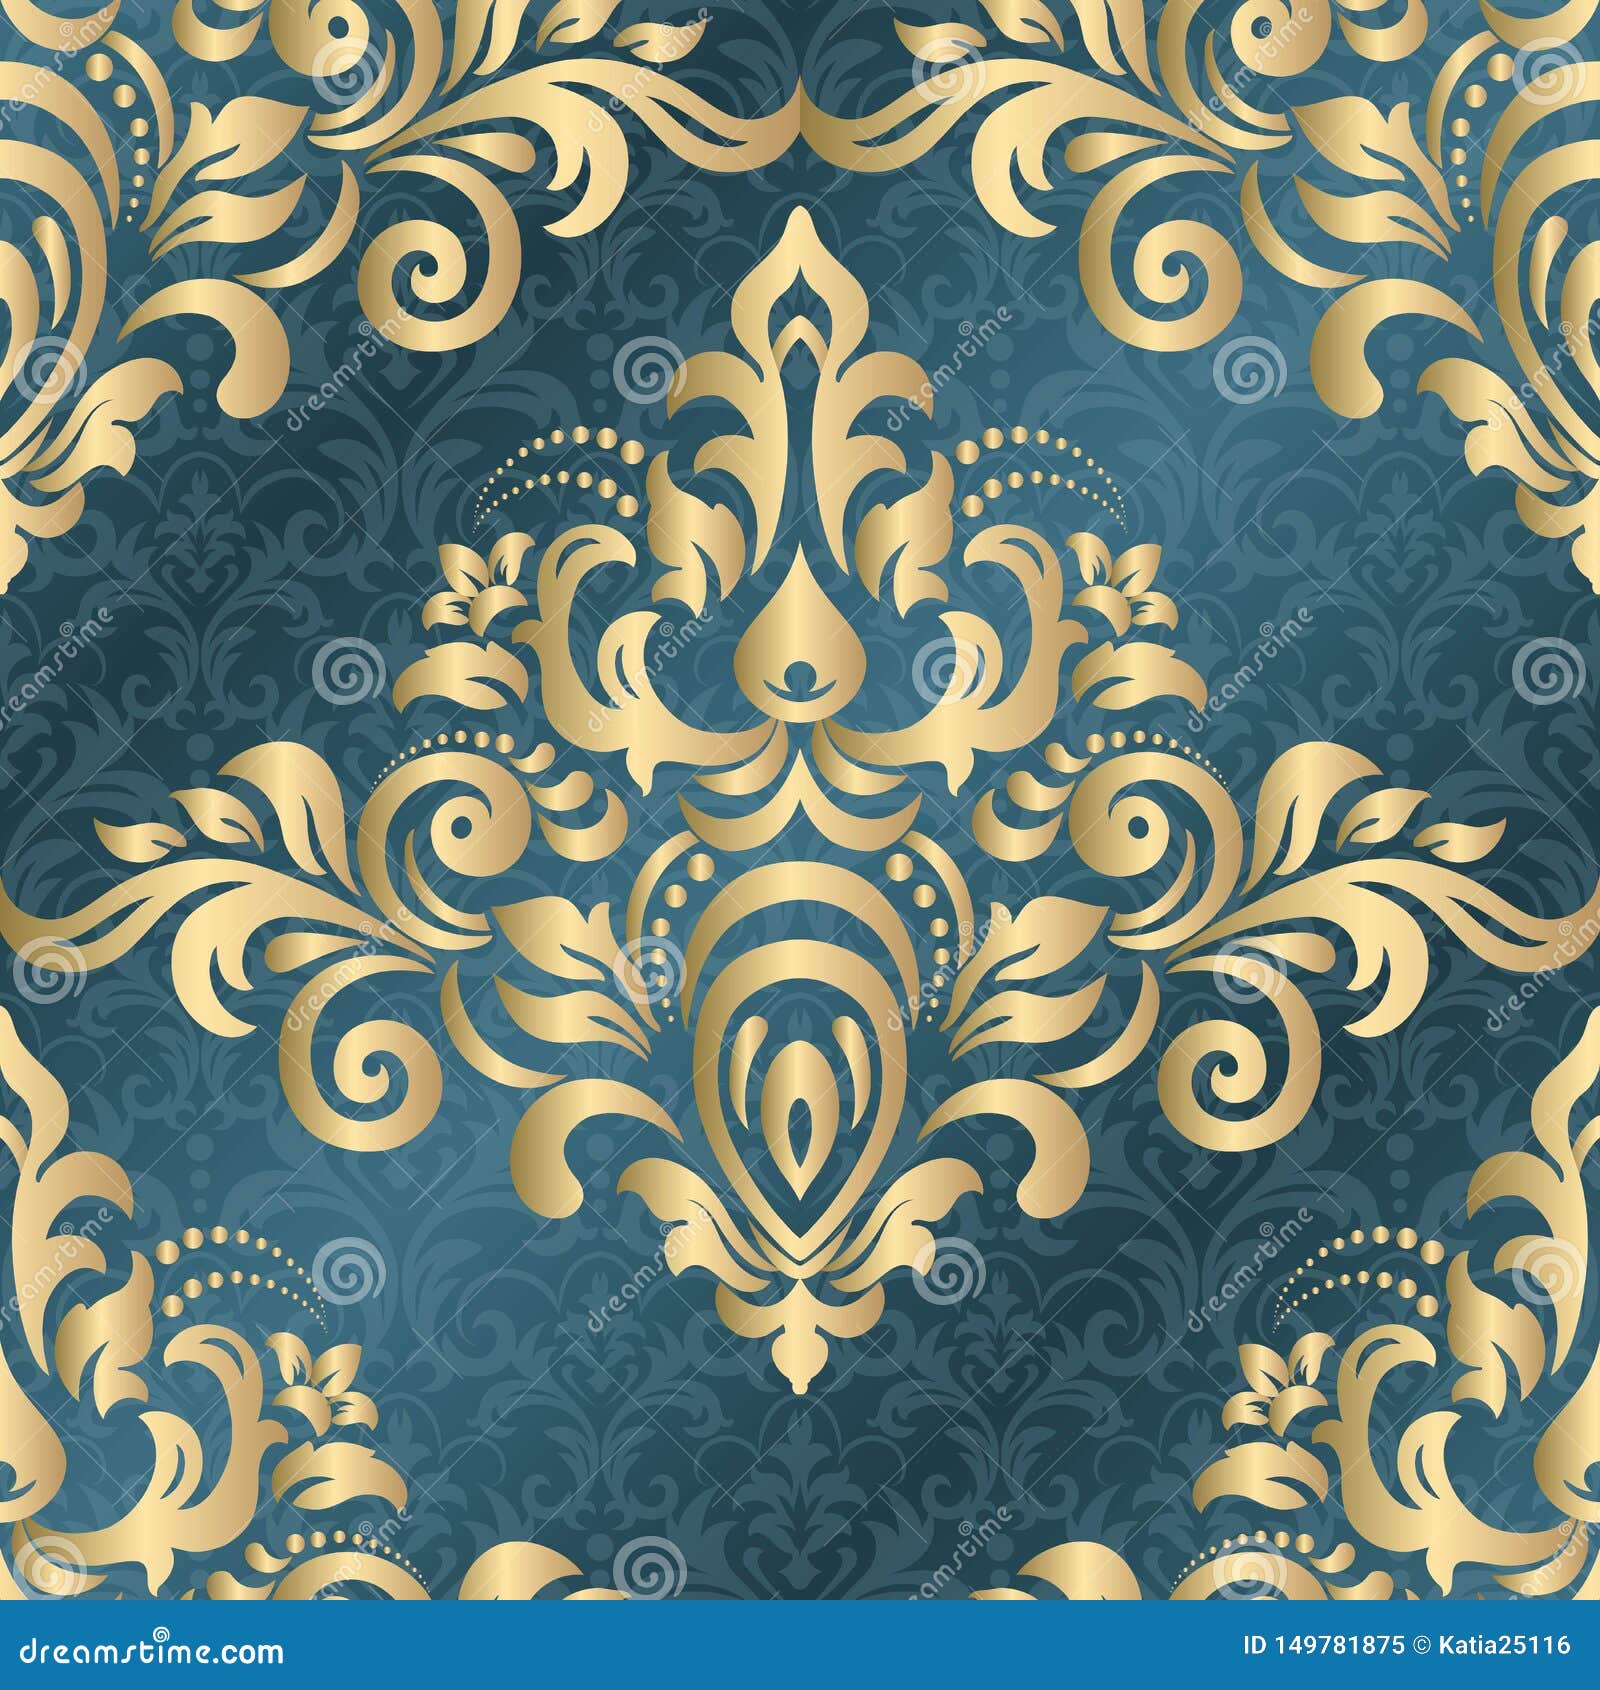 Buy RoseCraft PVC Damask 3D Design Wallpaper for Living RoomBedroomOffice  Walls 57 sqftroll Metallic Online in India at Best Prices